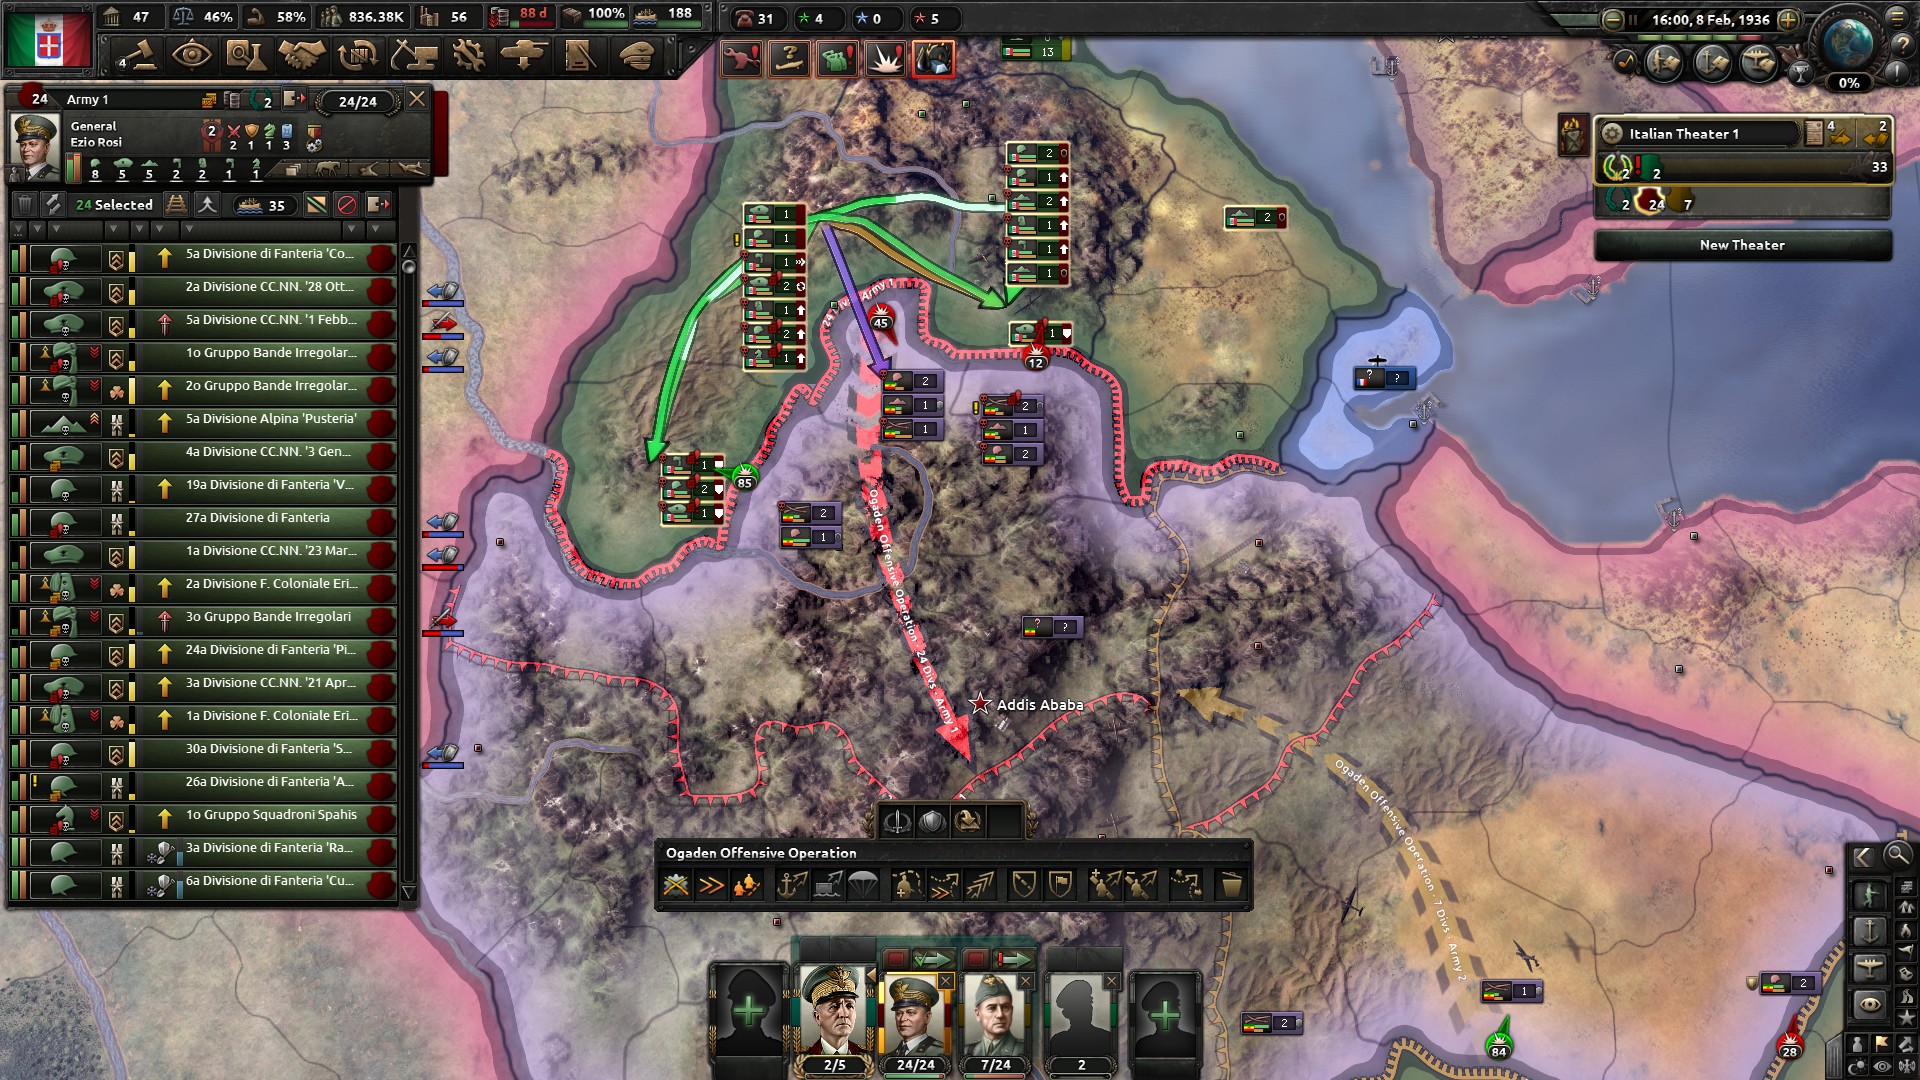 Hearts of Iron IV - How to defeat Ethiopia - Start of the offensive and annexation of Aussa: - BE57505